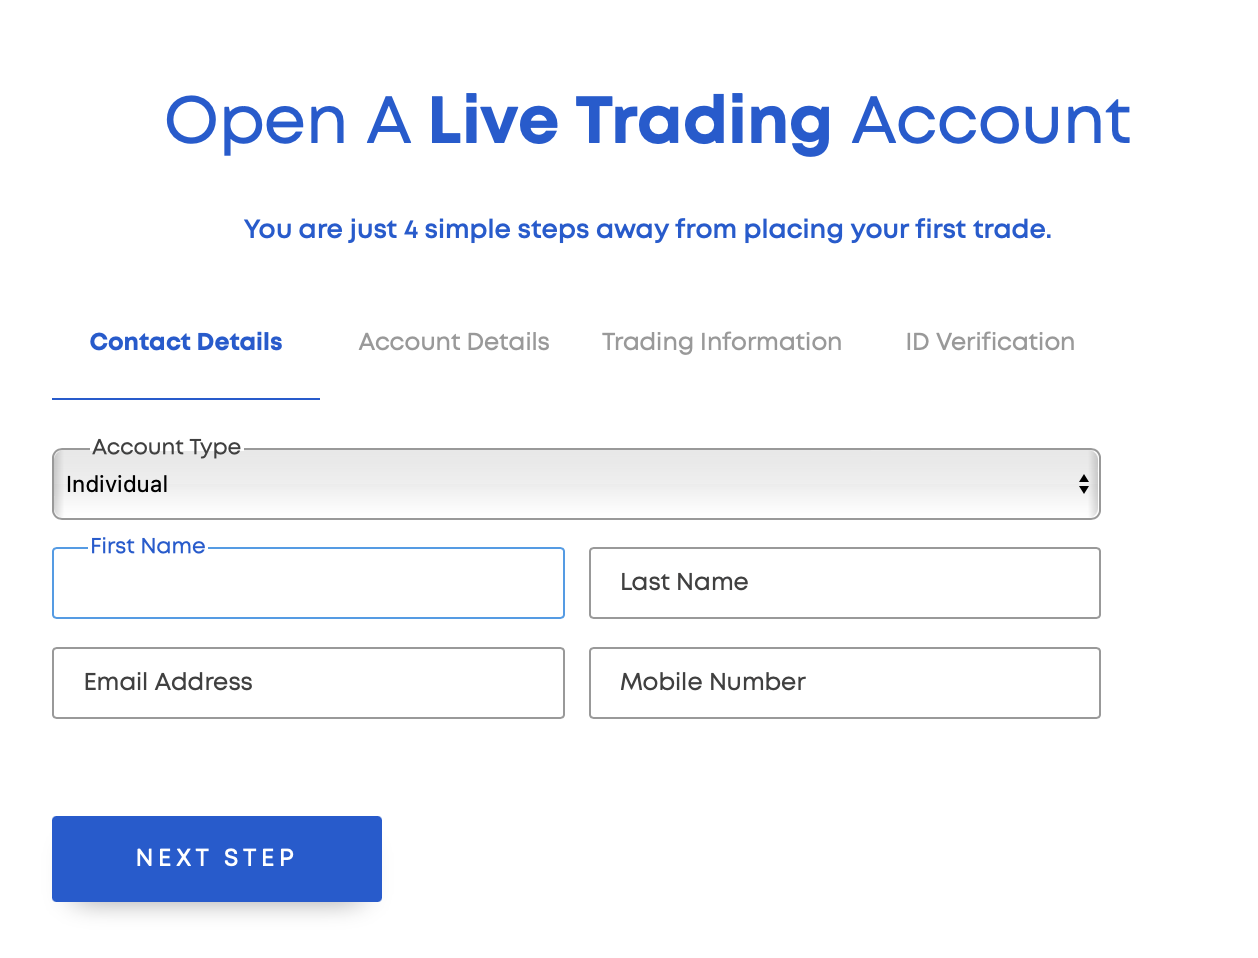 Registering an account with BlackBull Markets